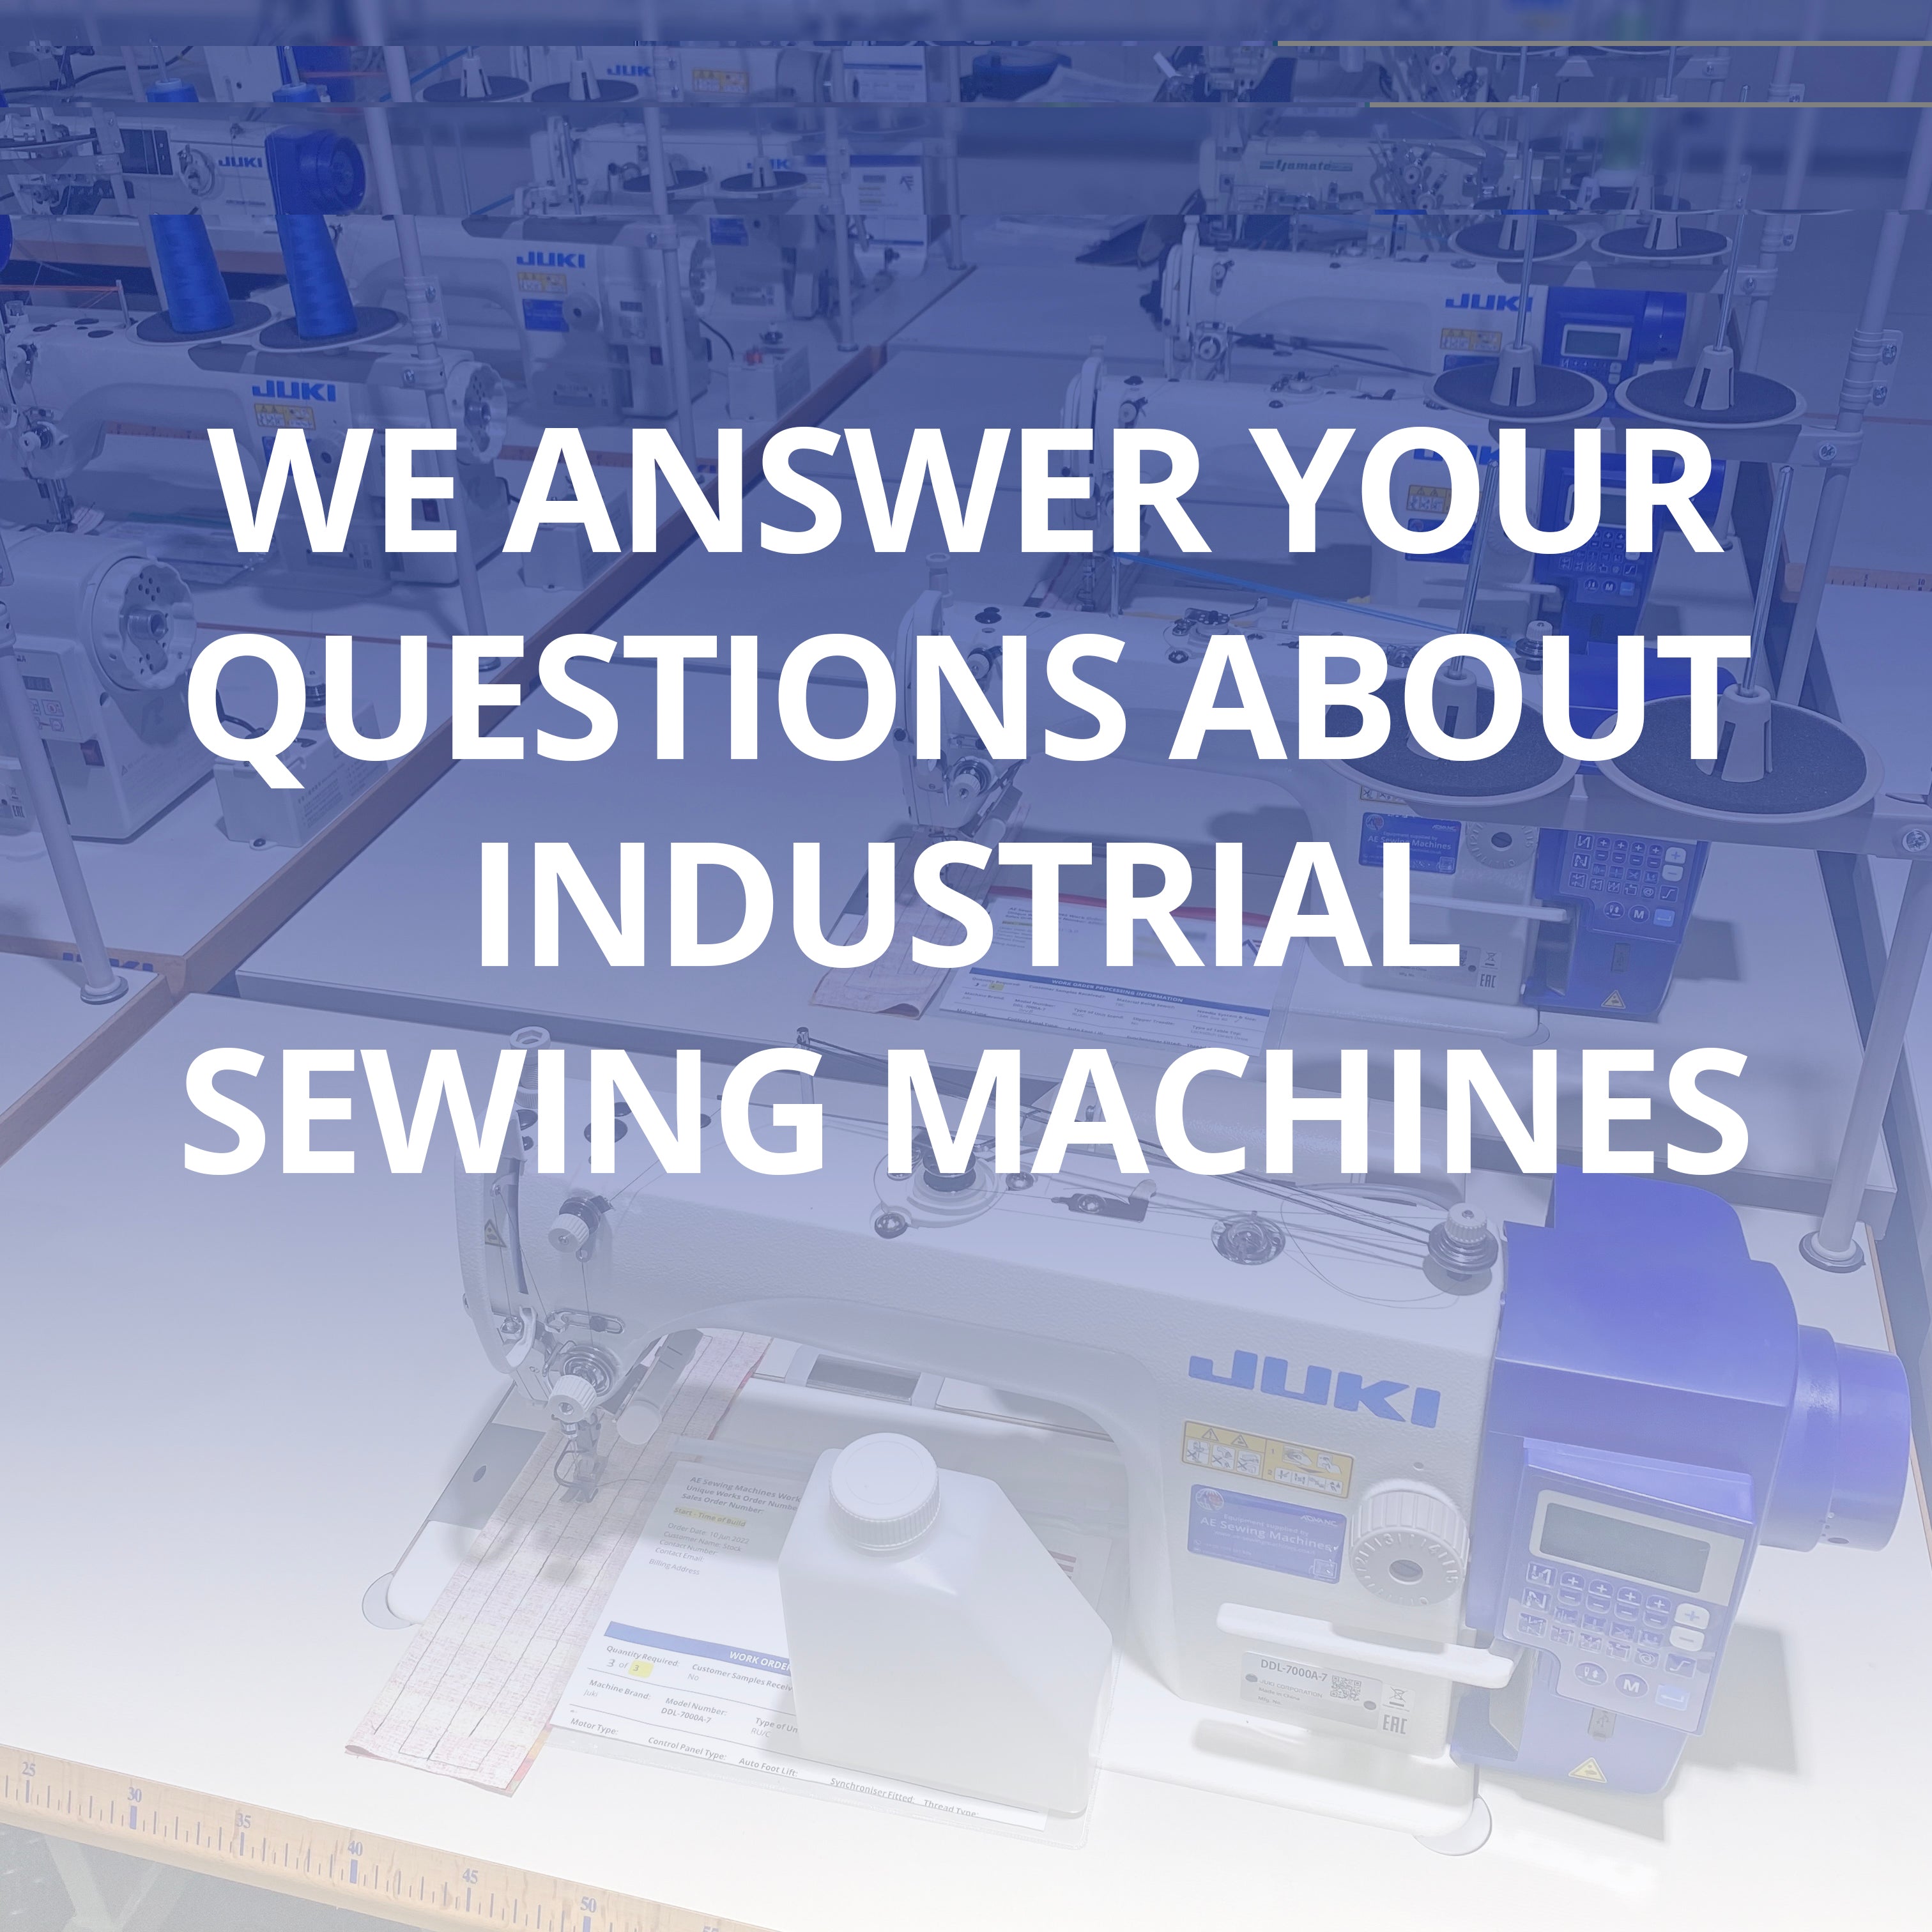 We answer your most frequently asked questions about industrial sewing machines!